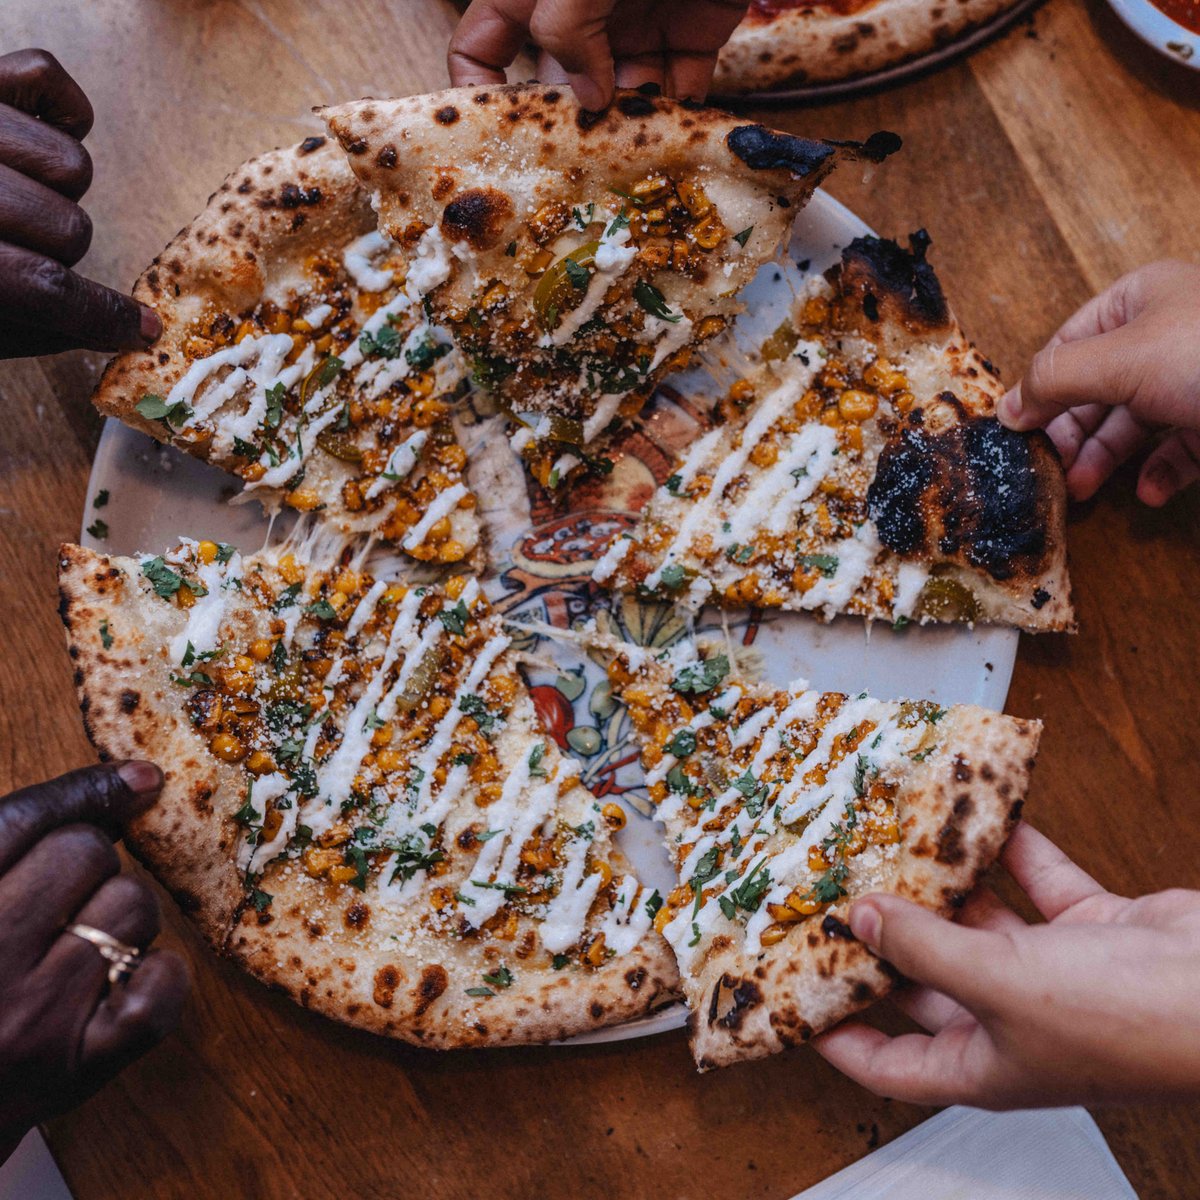 Come see us this Saturday at the #SYRFoodTrucks Foodie Fest and snag our NYS Fair favorite, Street Corn Pizza! $4 slice samples and whole pizzas available. Only at The Great New York State Fair!